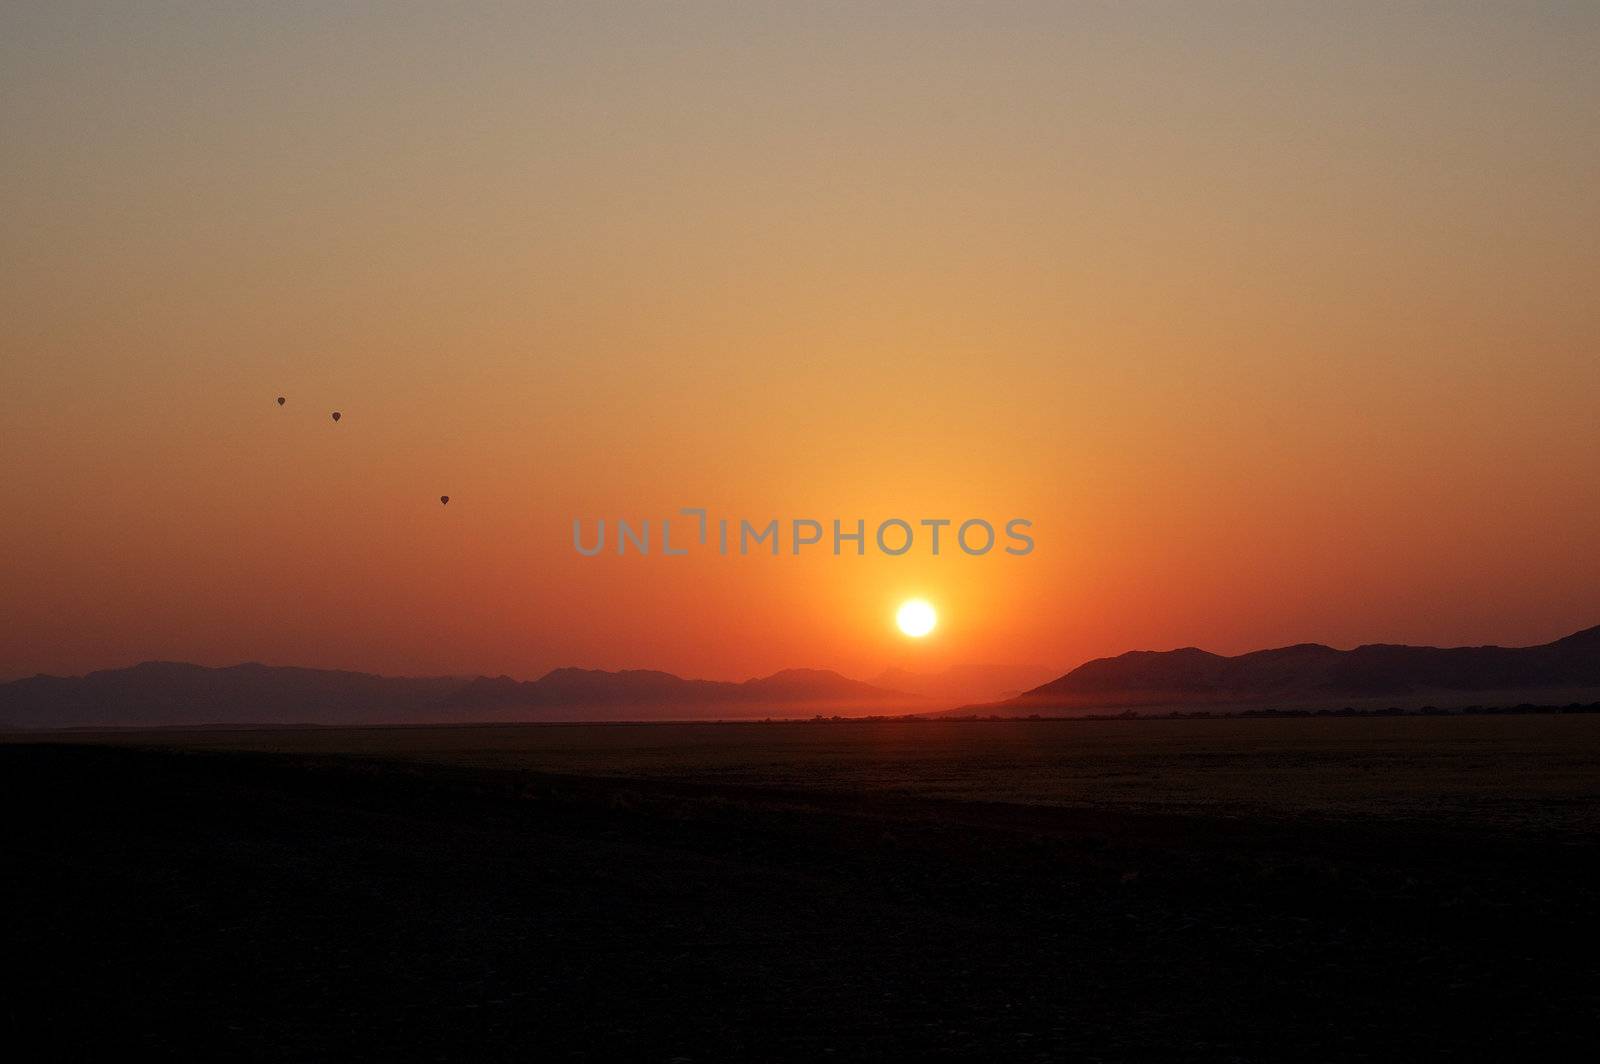 3 balloons silhouette in the sky at sunset, Sossusvlei, Namibia